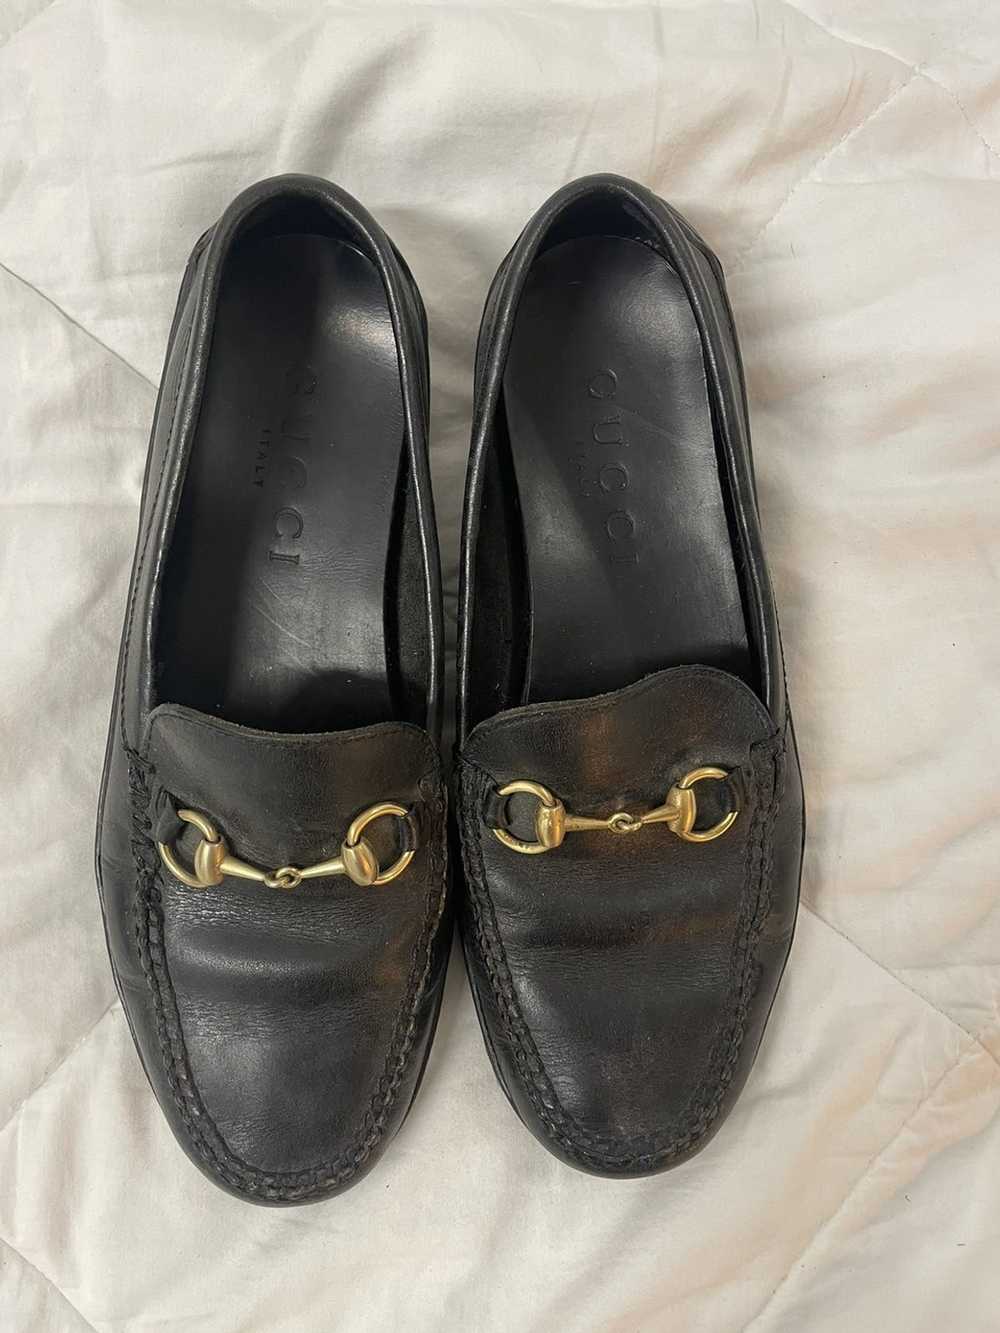 Gucci Gucci Leather Horsebit Loafer - image 2